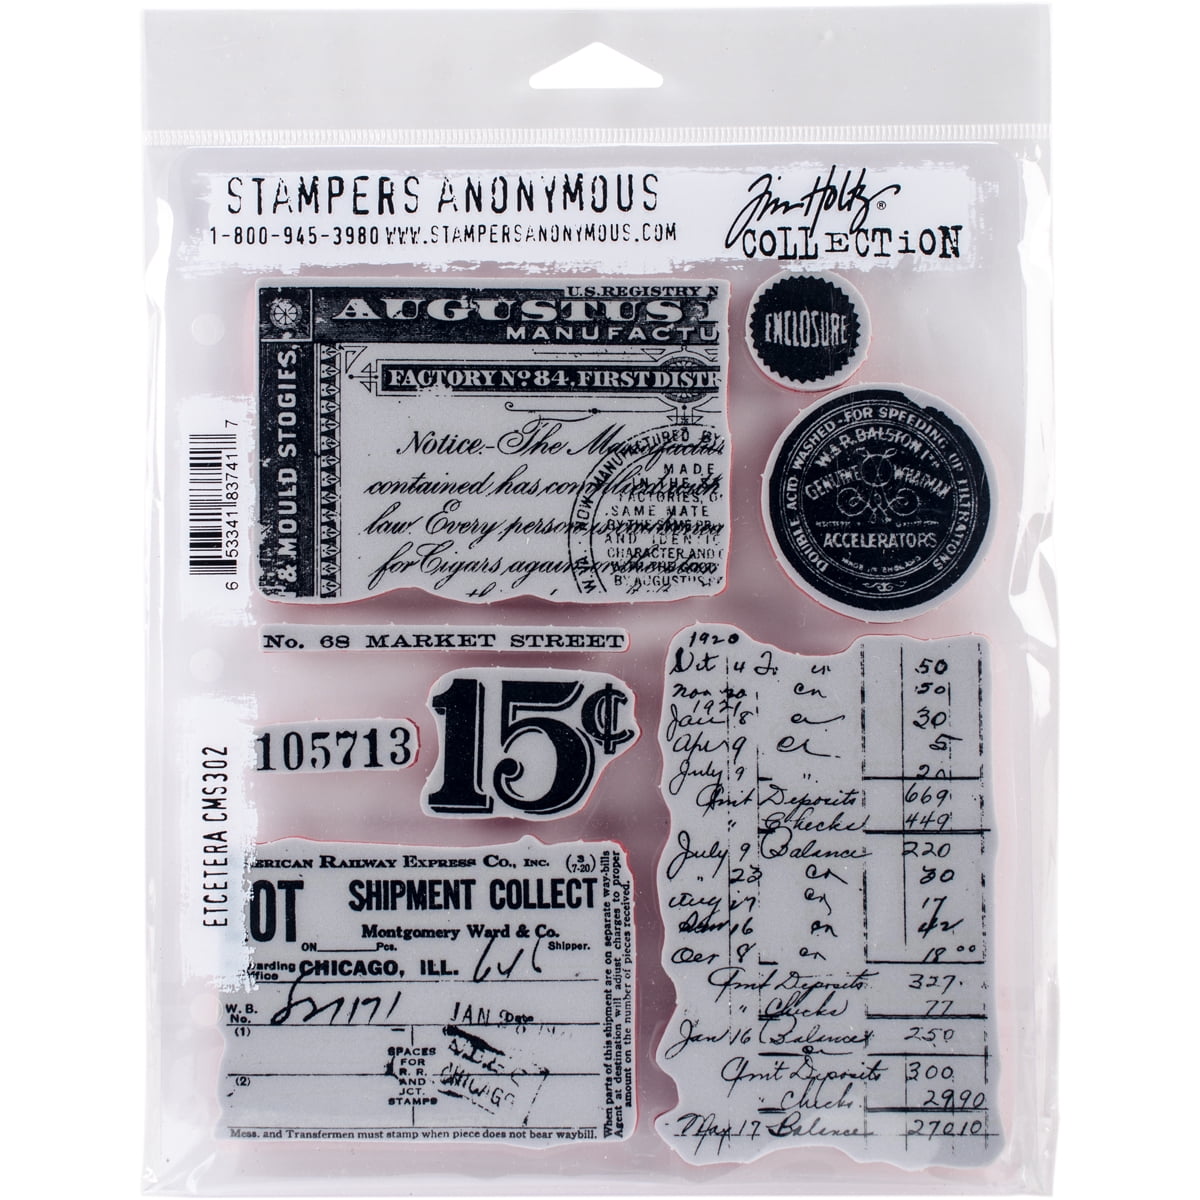 7 by 8.5 Stampers Anonymous Tim Holtz Cling Rubber Stamp Set Ledger Script